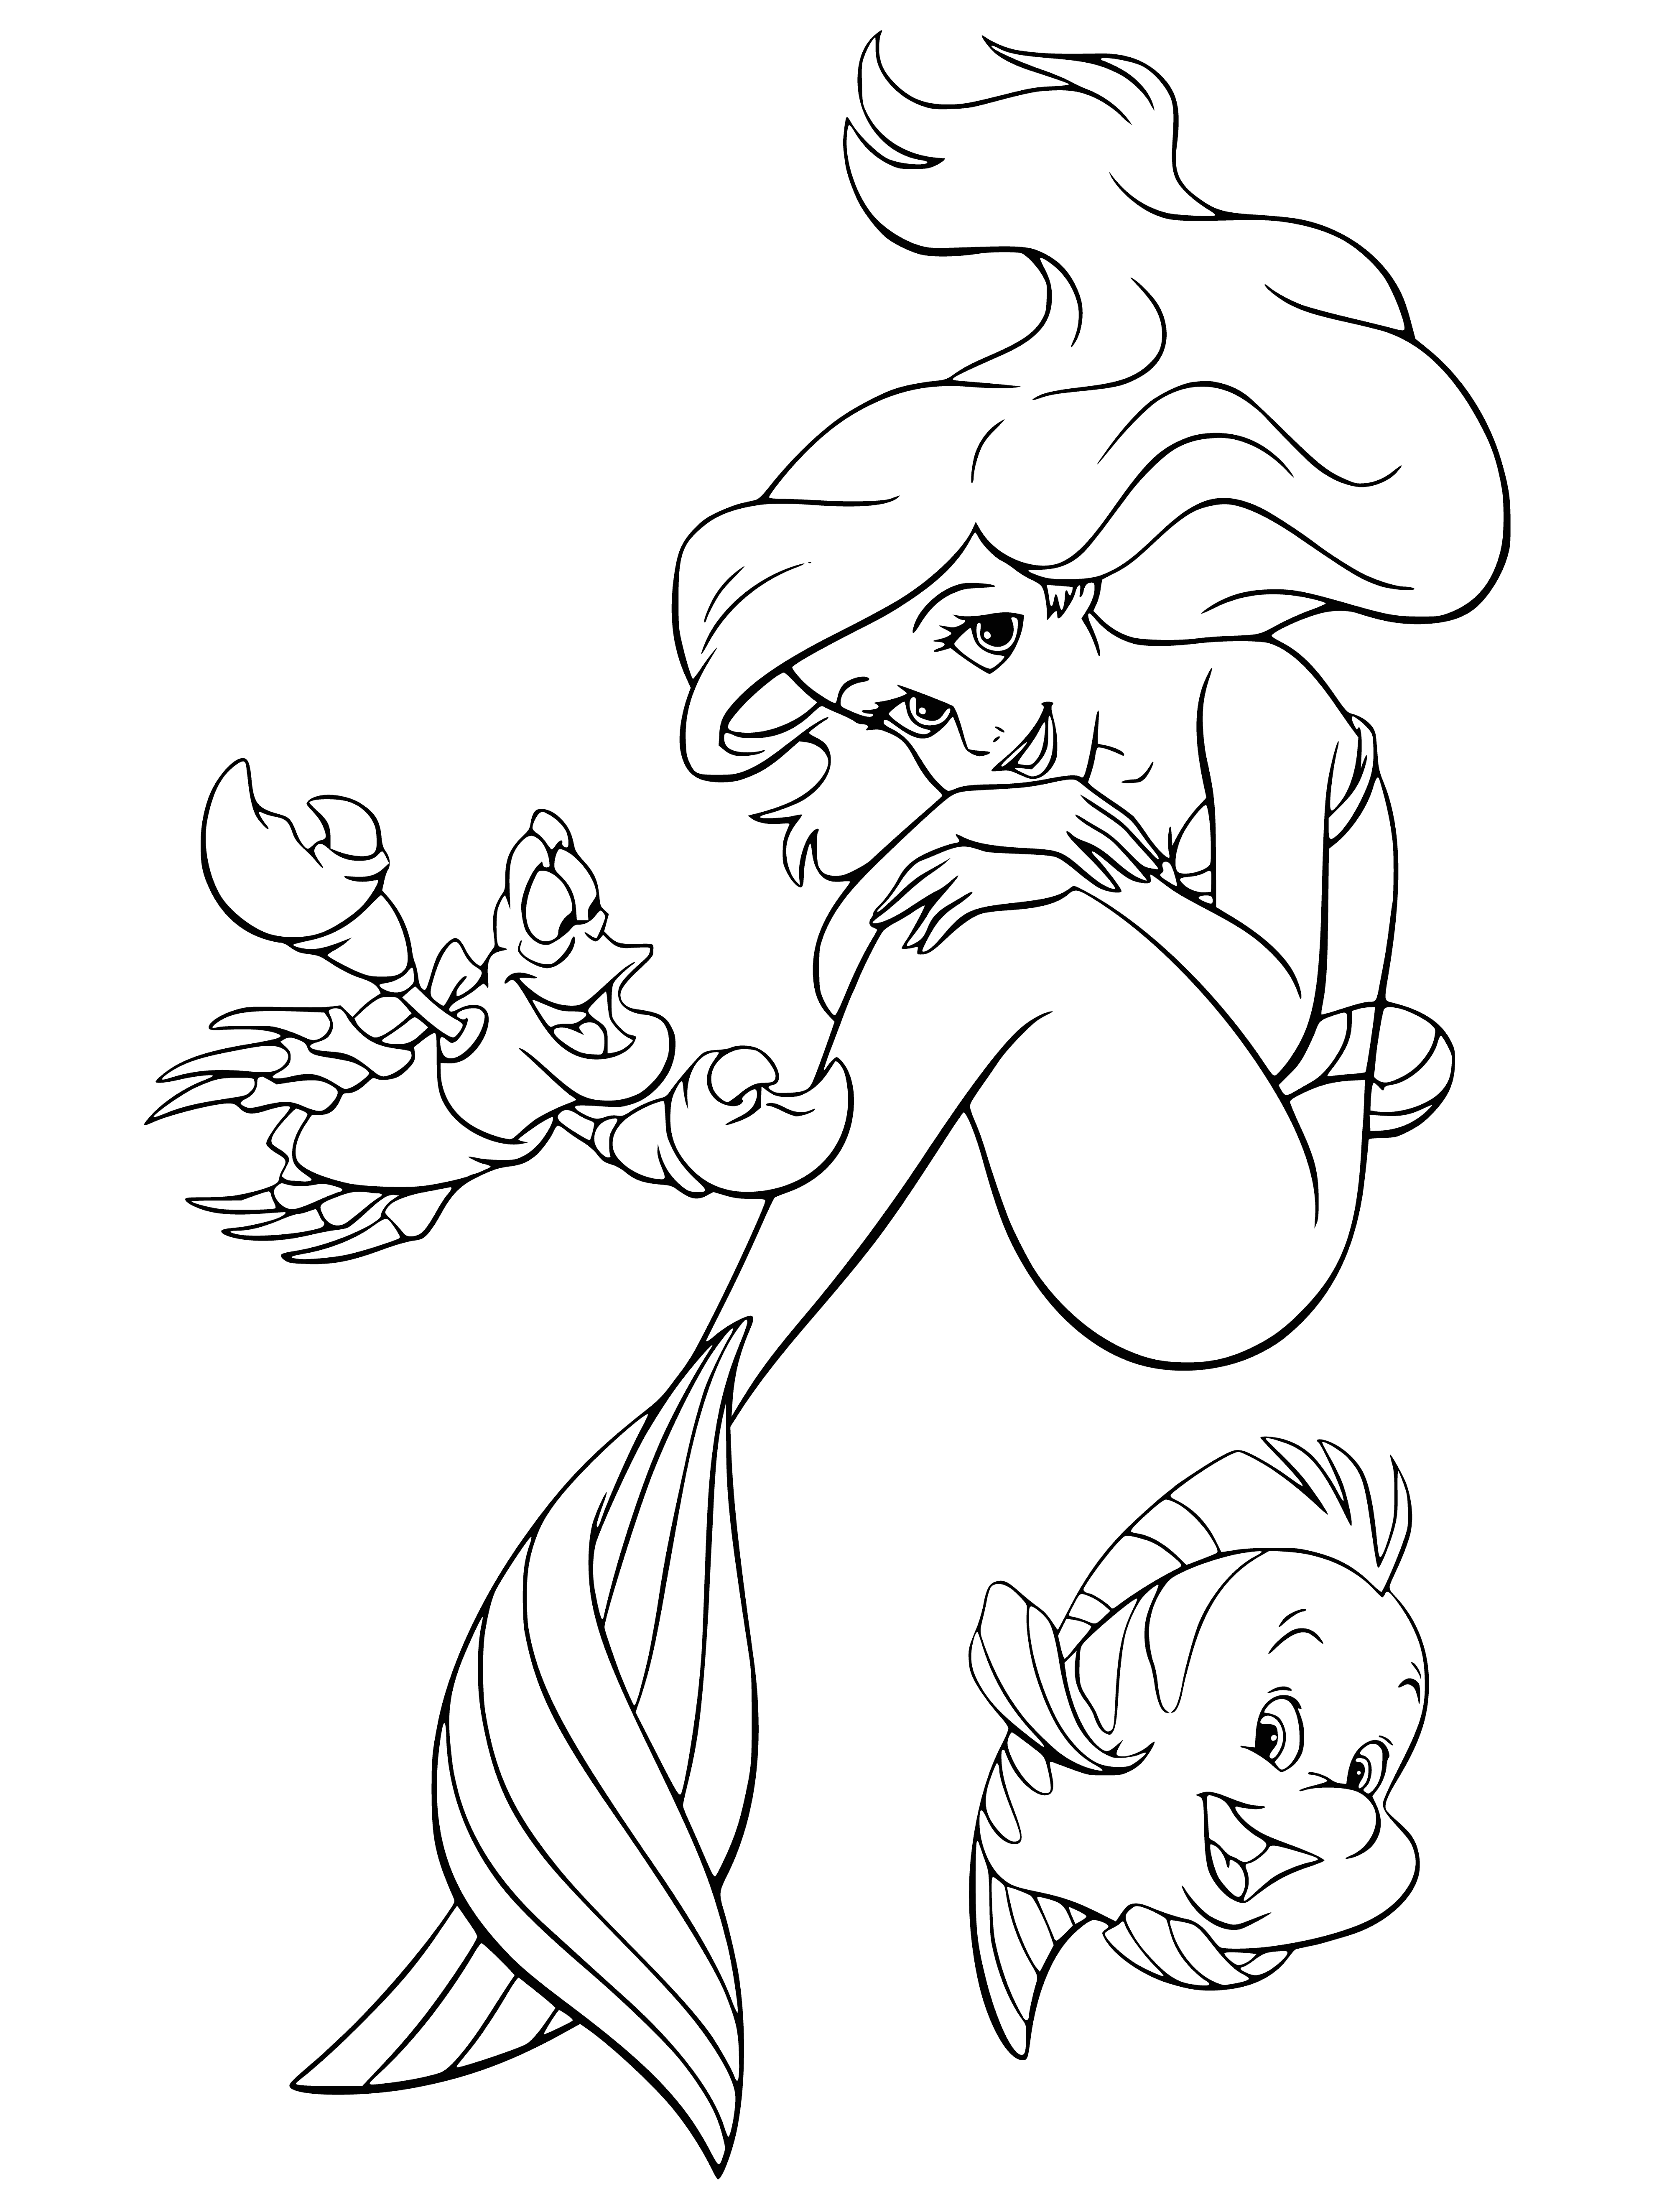 coloring page: Mermaid Ariel stands in peaceful lagoon, holding a conch shell, wearing a greenish-blue tail and matching bikini top. Impish face grins wide.